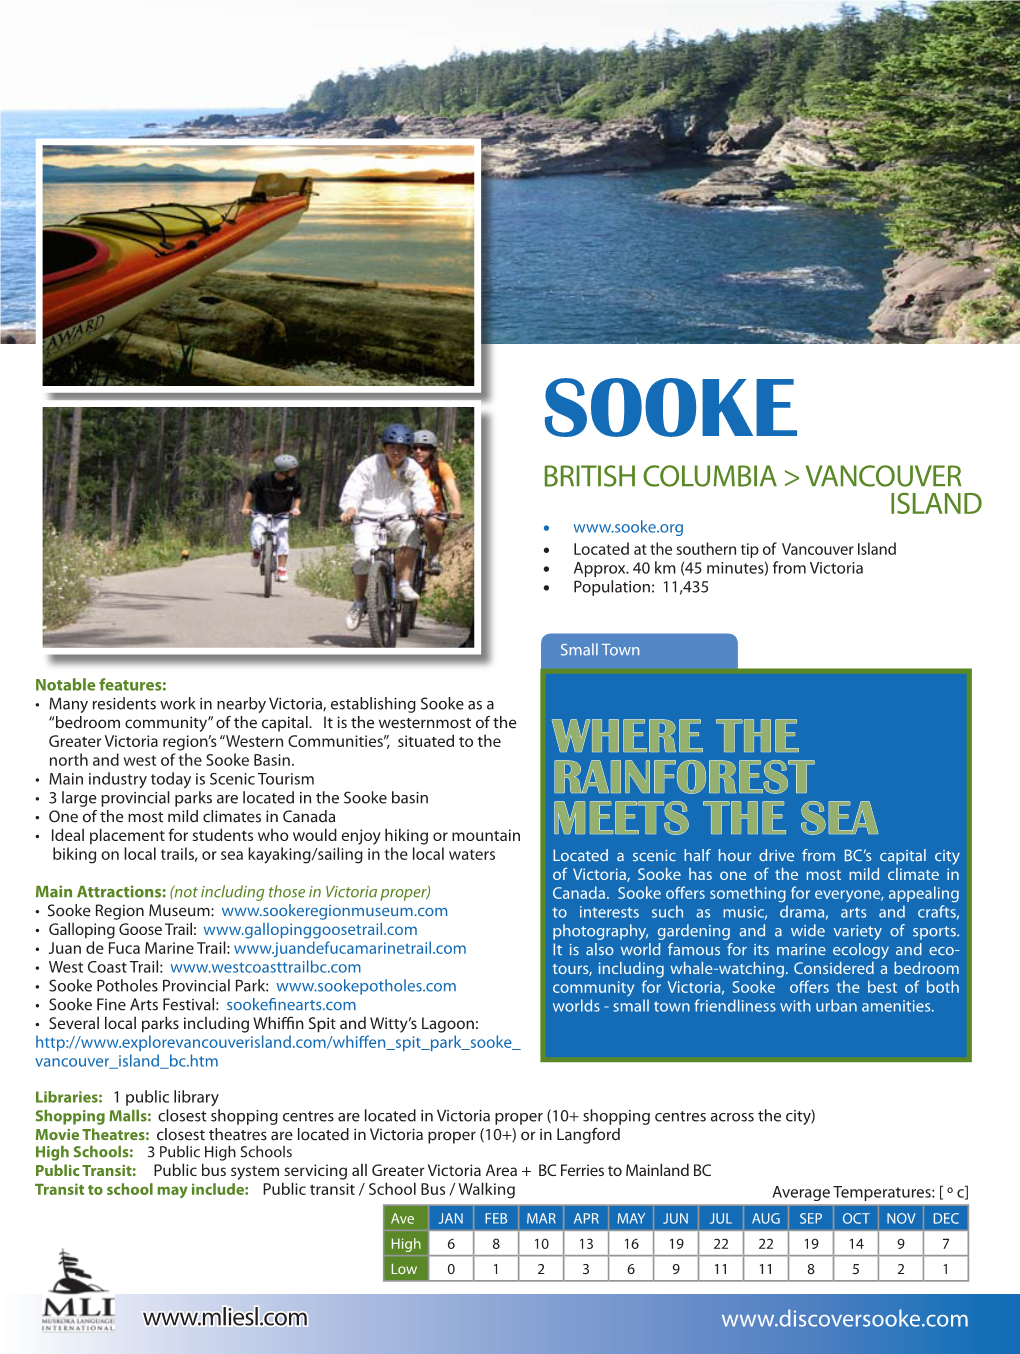 SOOKE BRITISH COLUMBIA > VANCOUVER ISLAND • • Located at the Southern Tip of Vancouver Islande • Approx